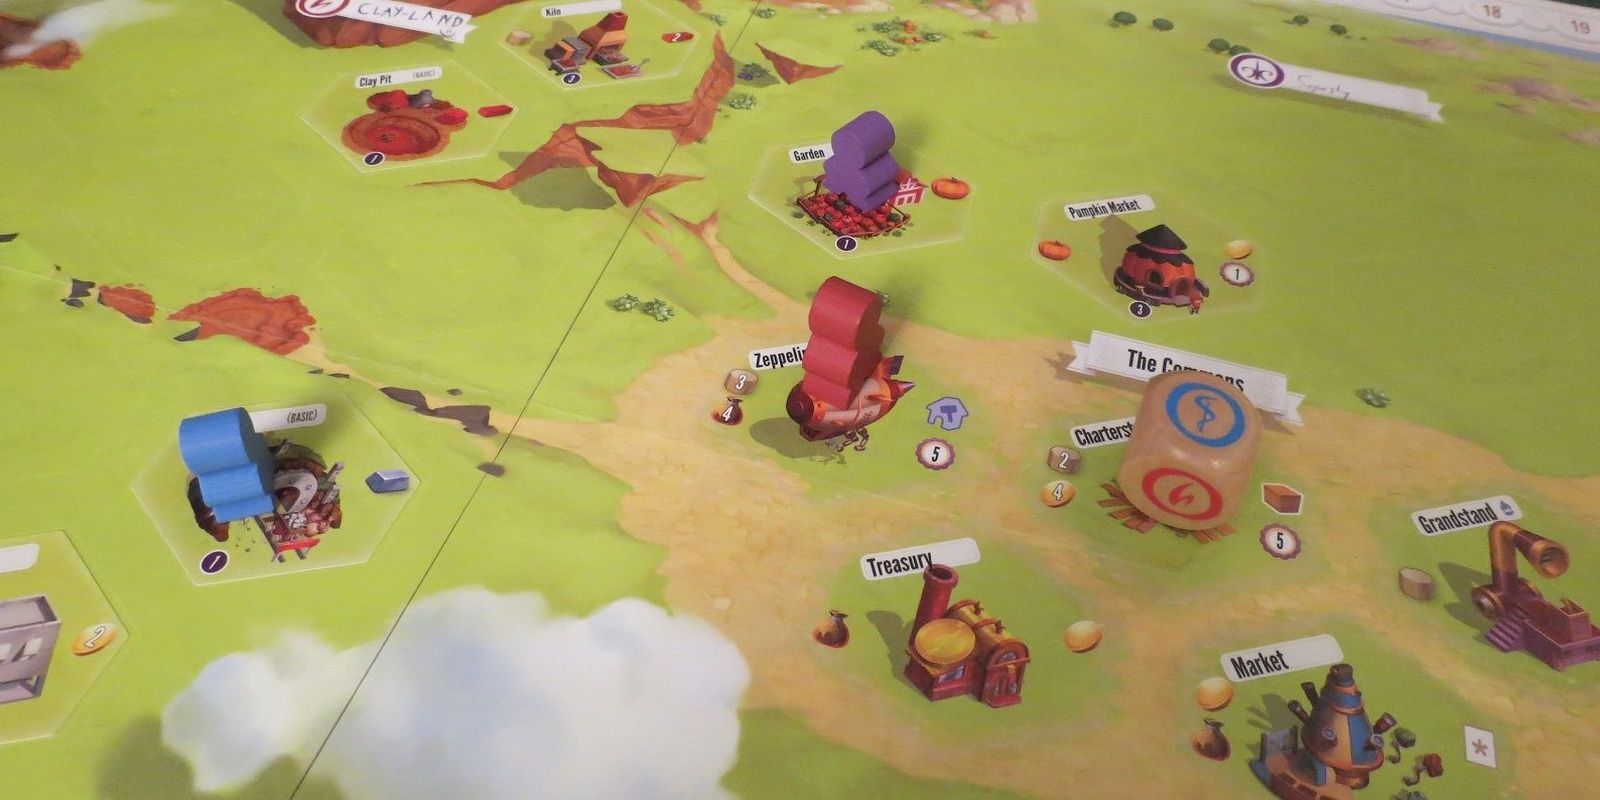 Charterstone Board Game Being Played On The Table